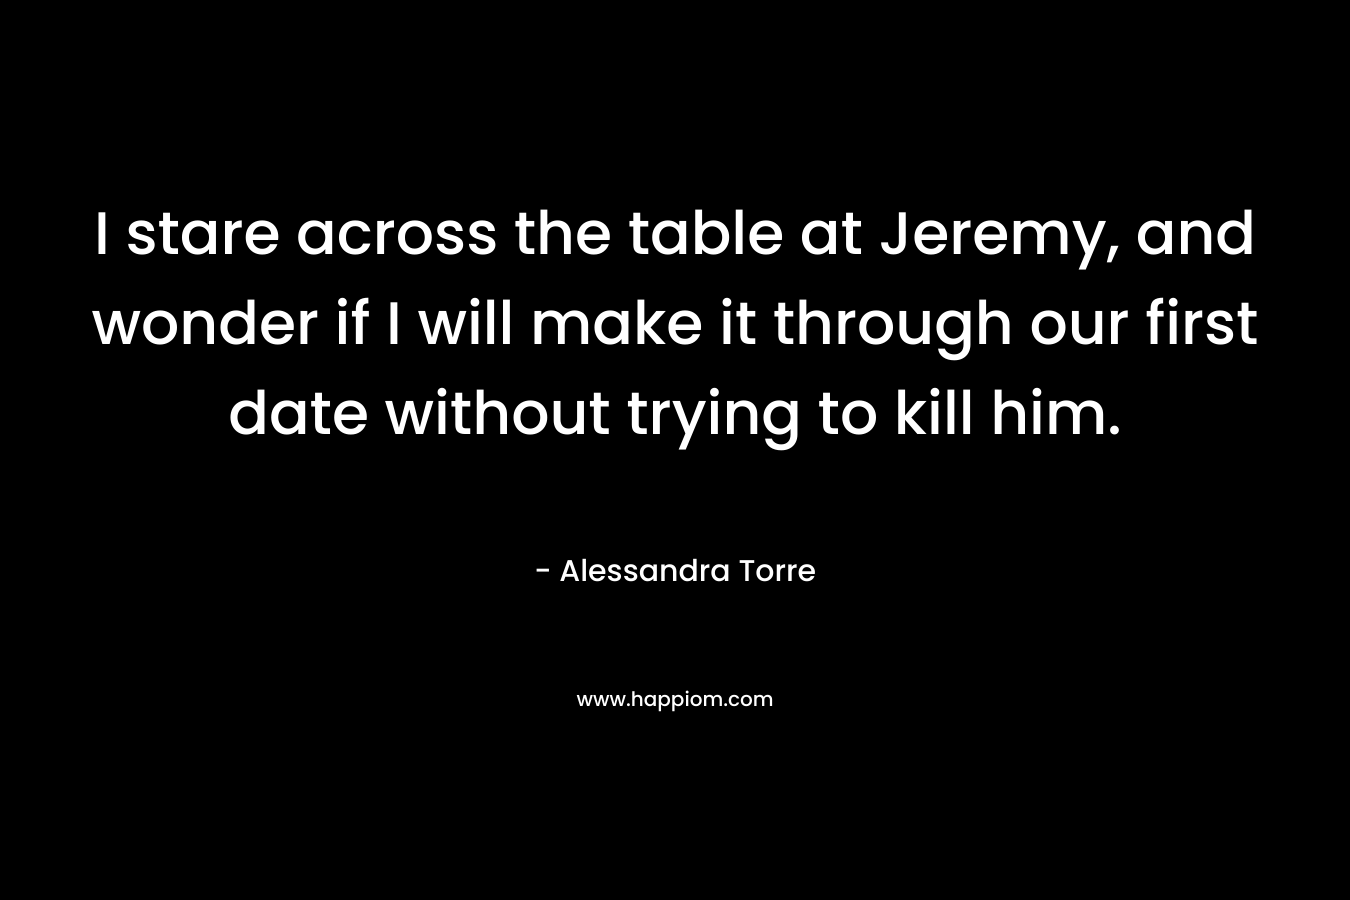 I stare across the table at Jeremy, and wonder if I will make it through our first date without trying to kill him. – Alessandra Torre